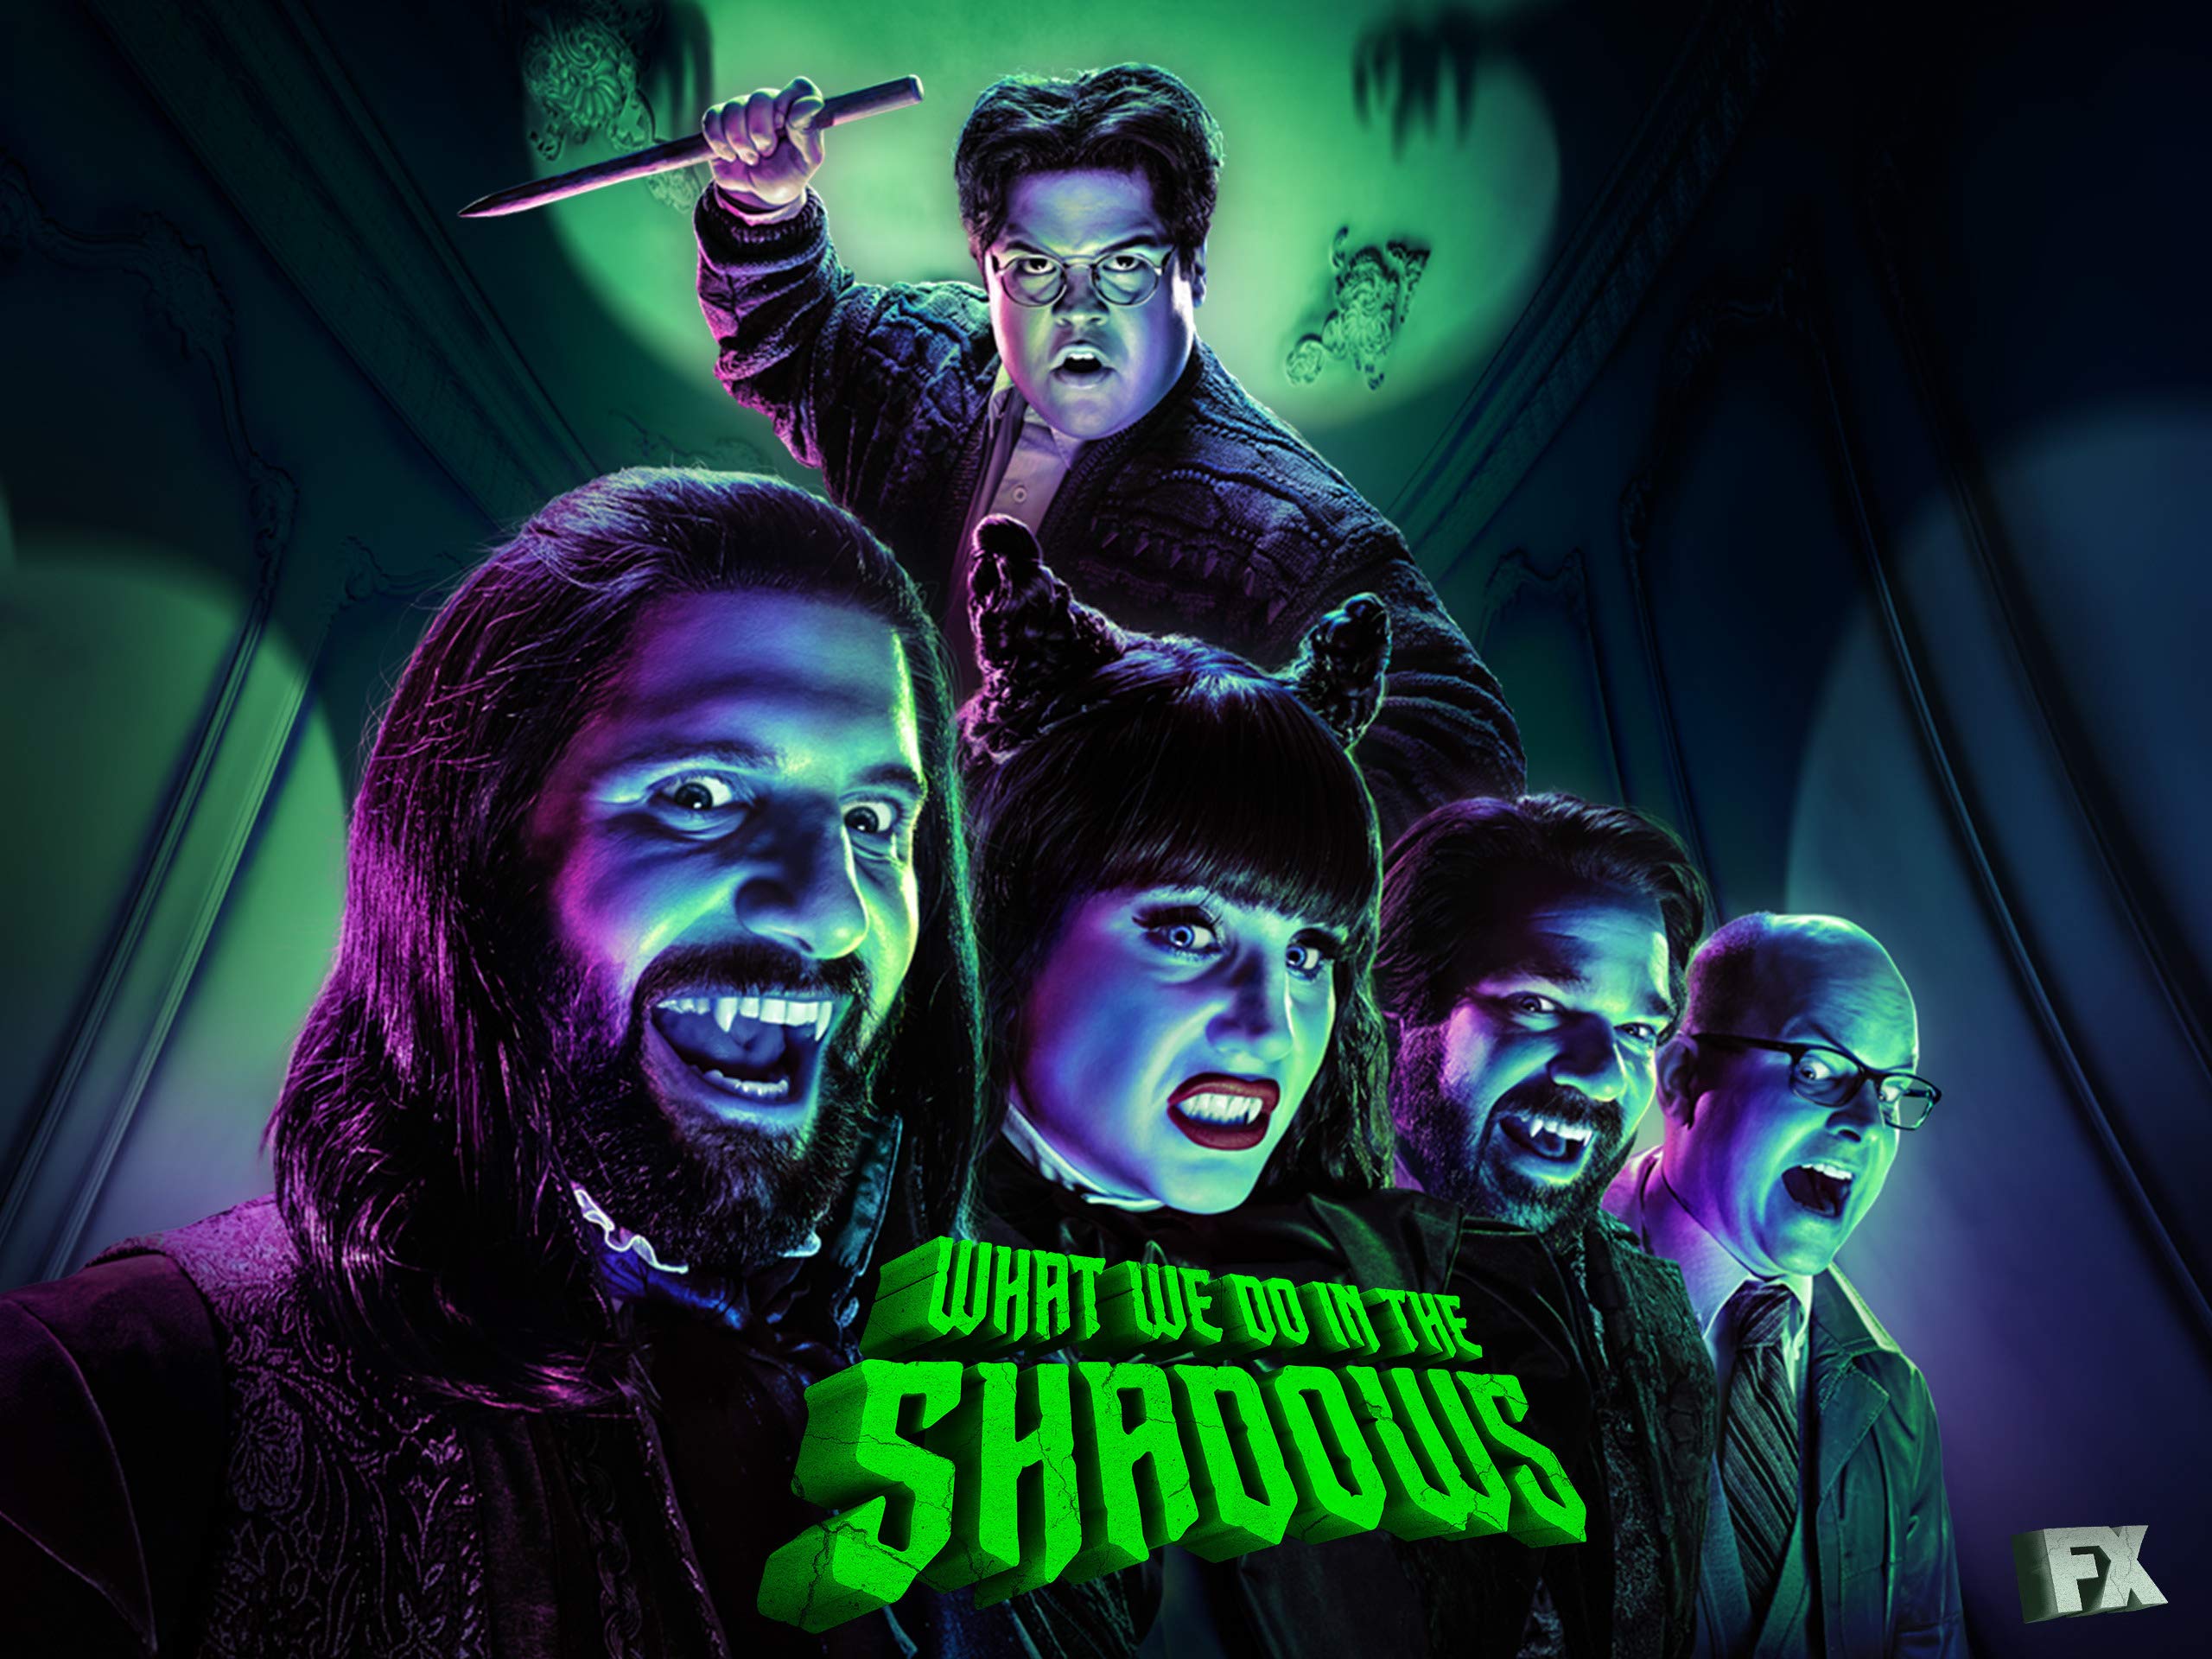 A Curse From A Chain Letter! What We Do In The Shadows You’ve Been Cursed Clip Released